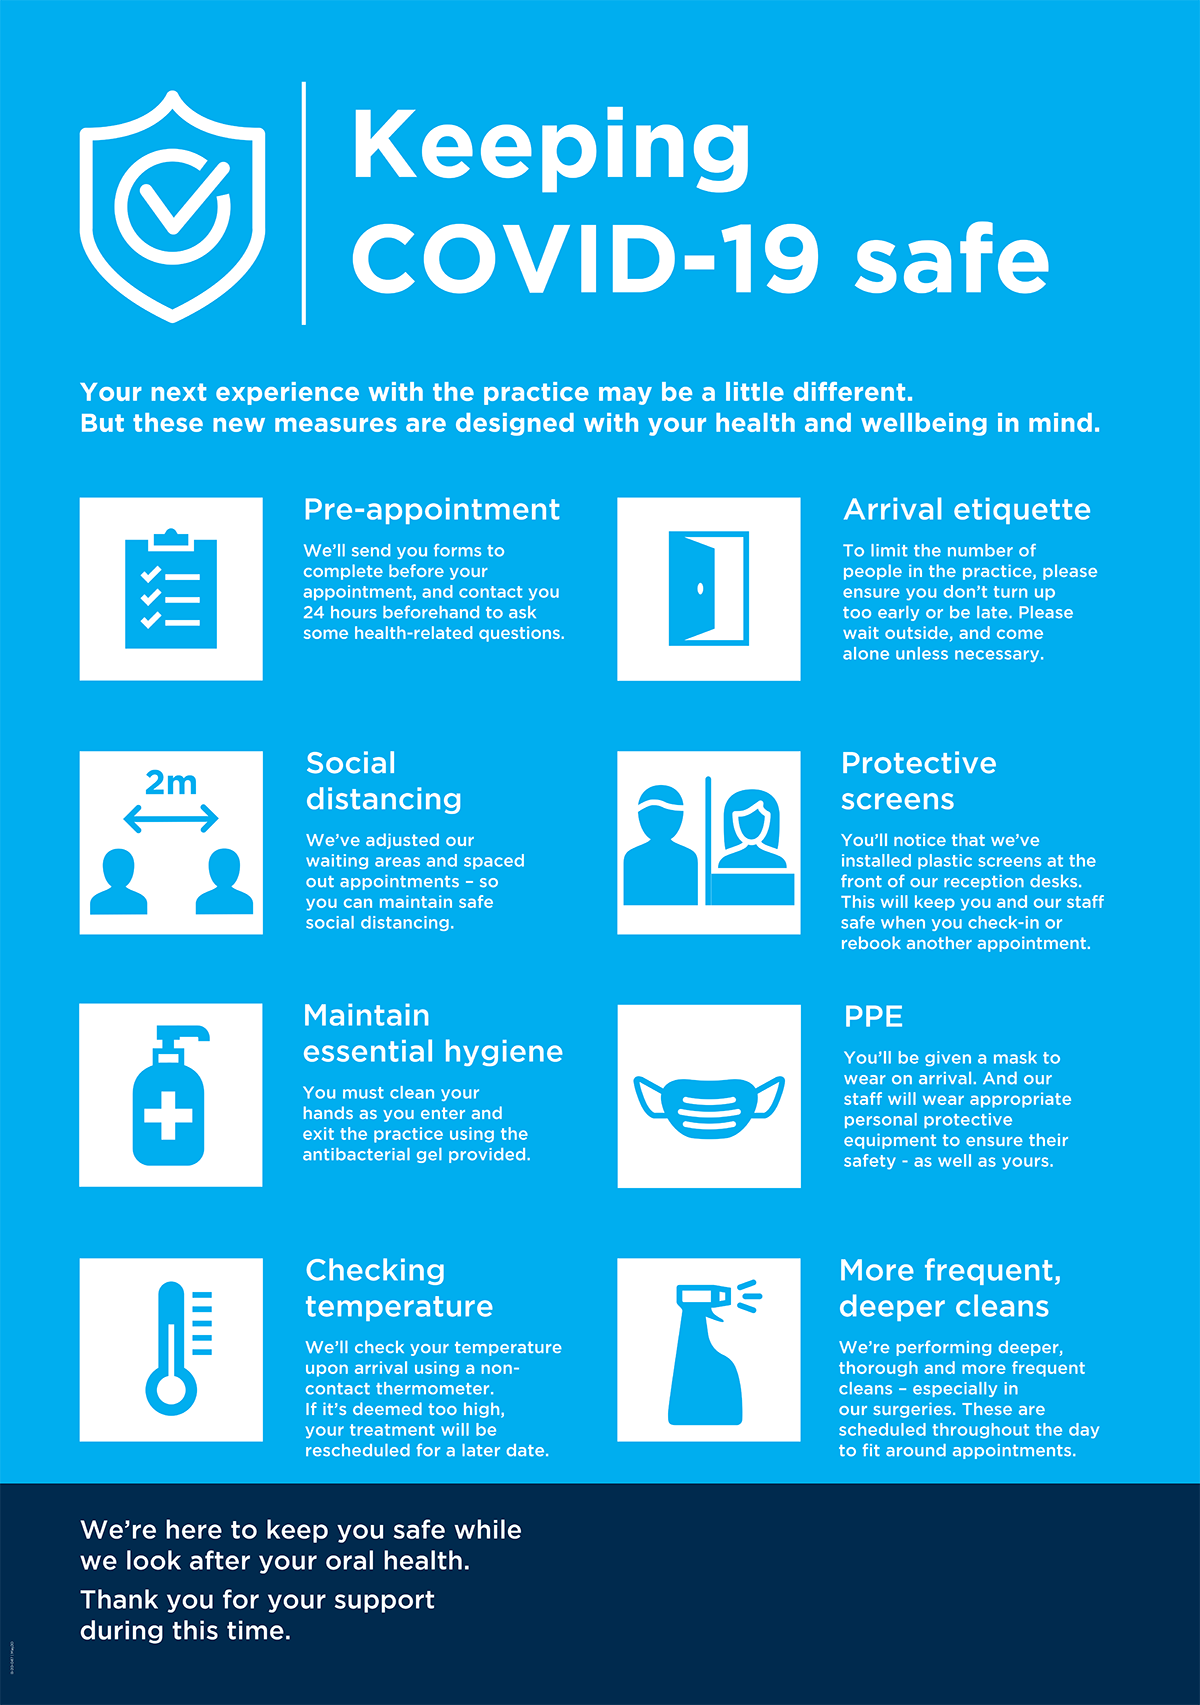 Keeping COVID-19 safe